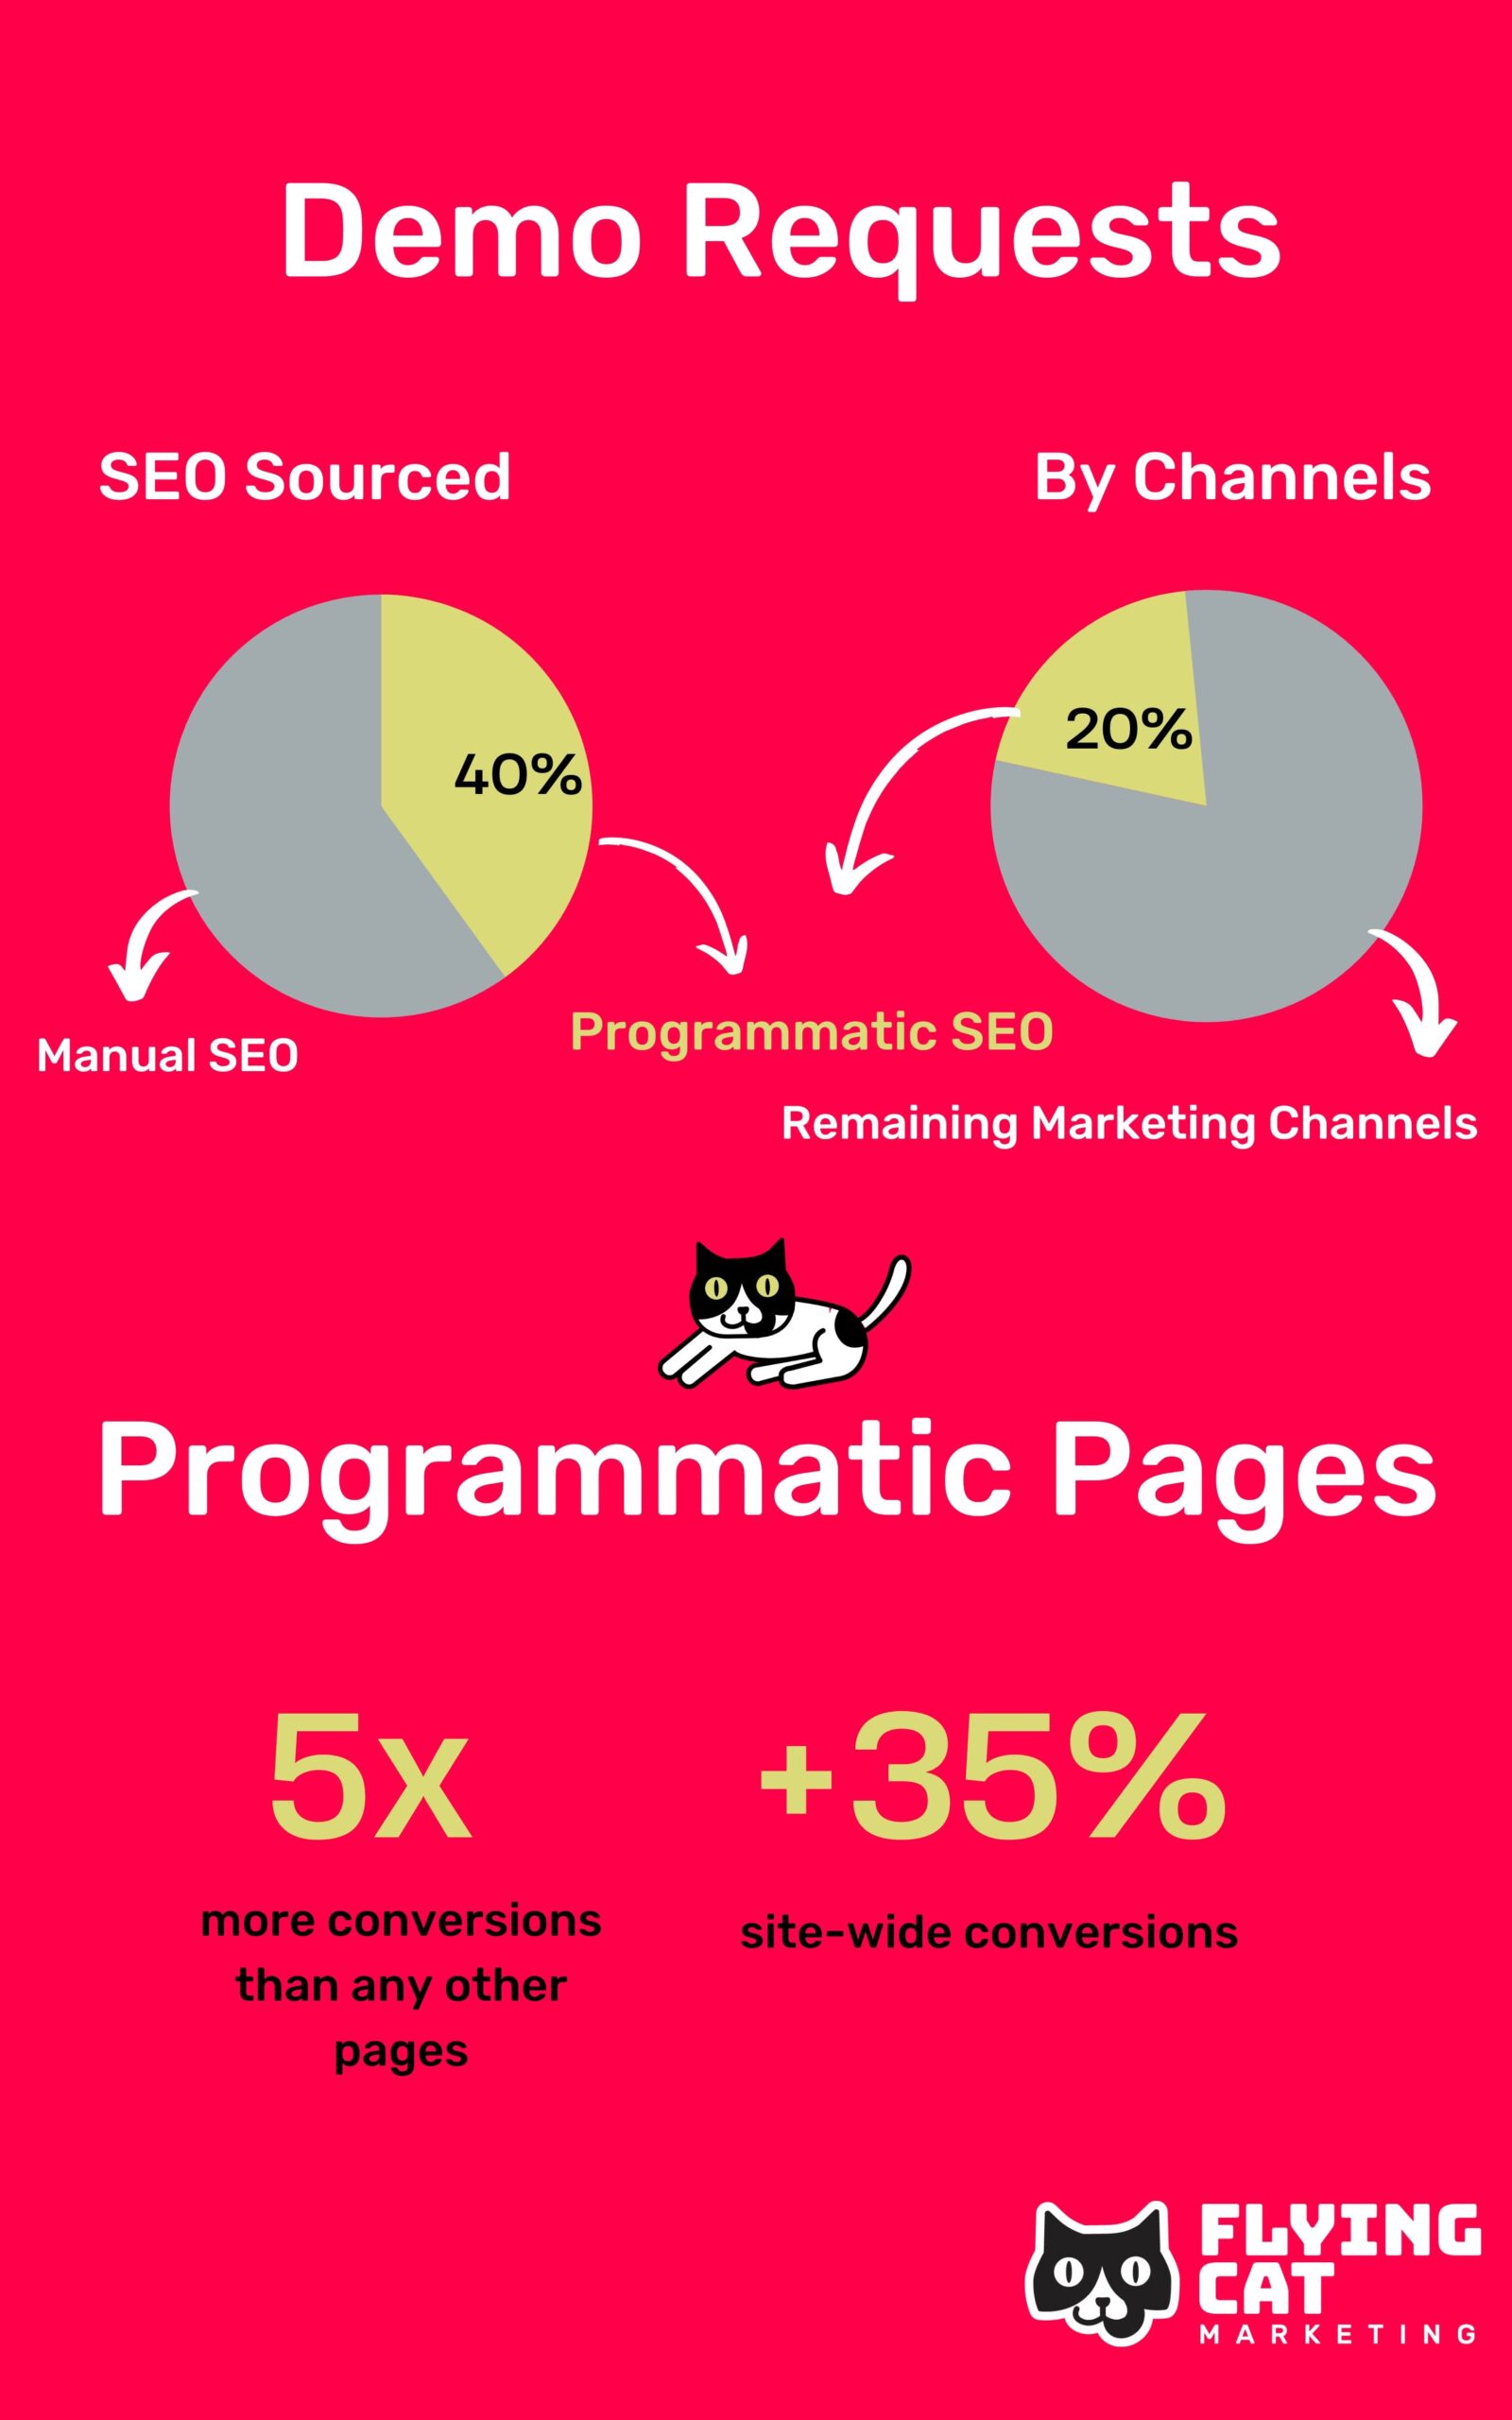 Infographic showing how programmatic SEO makes up 40% of demo requests 